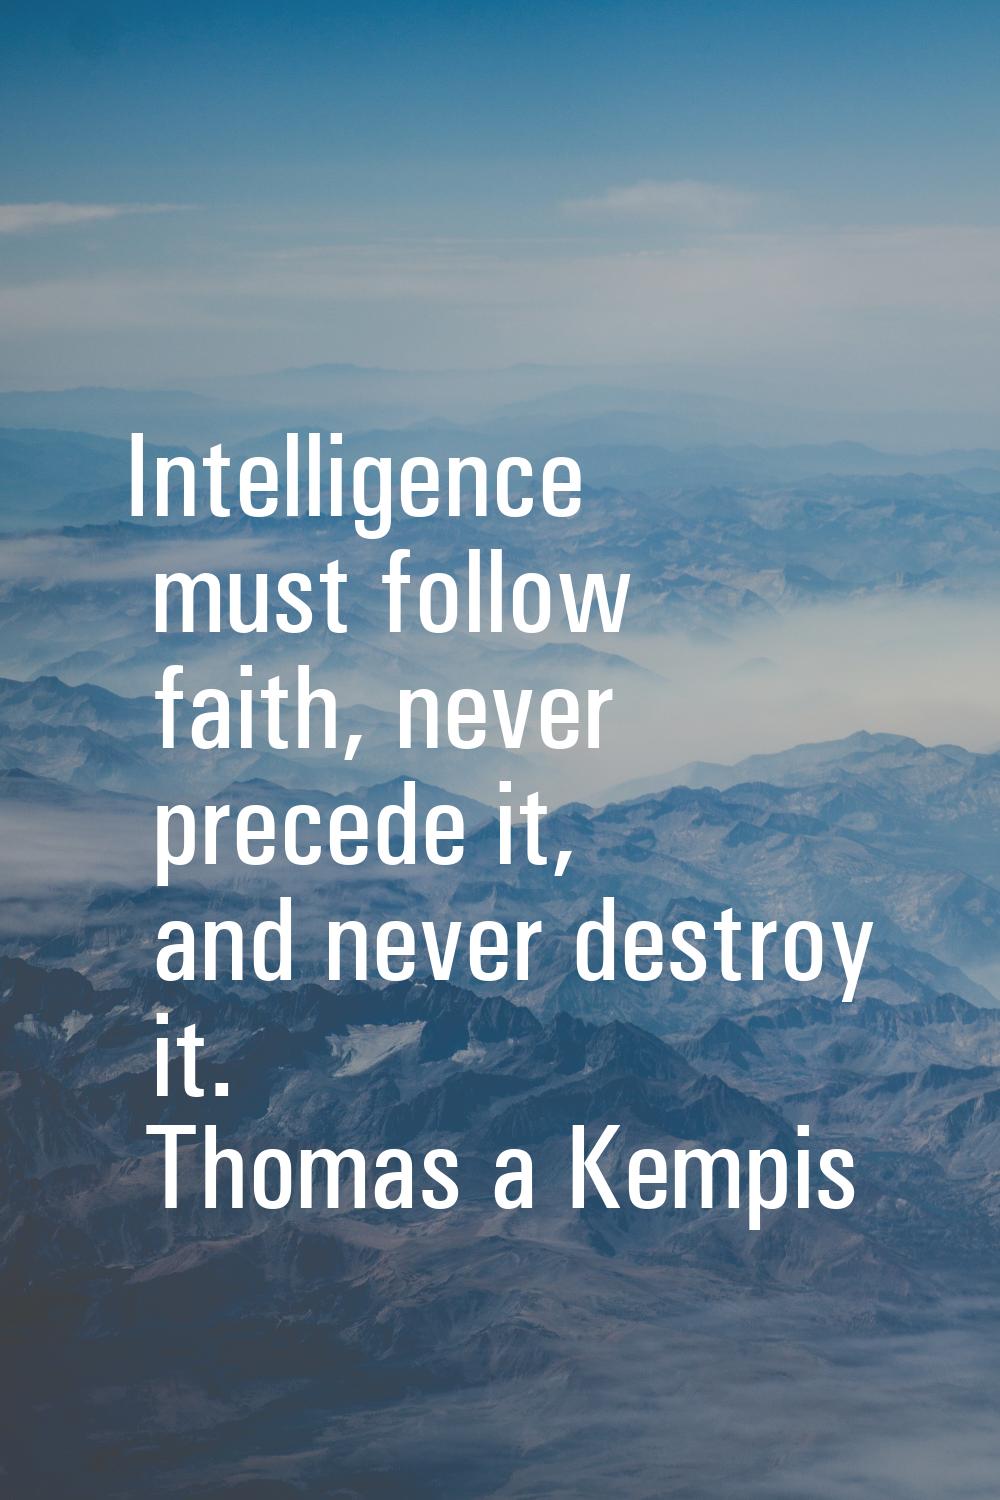 Intelligence must follow faith, never precede it, and never destroy it.